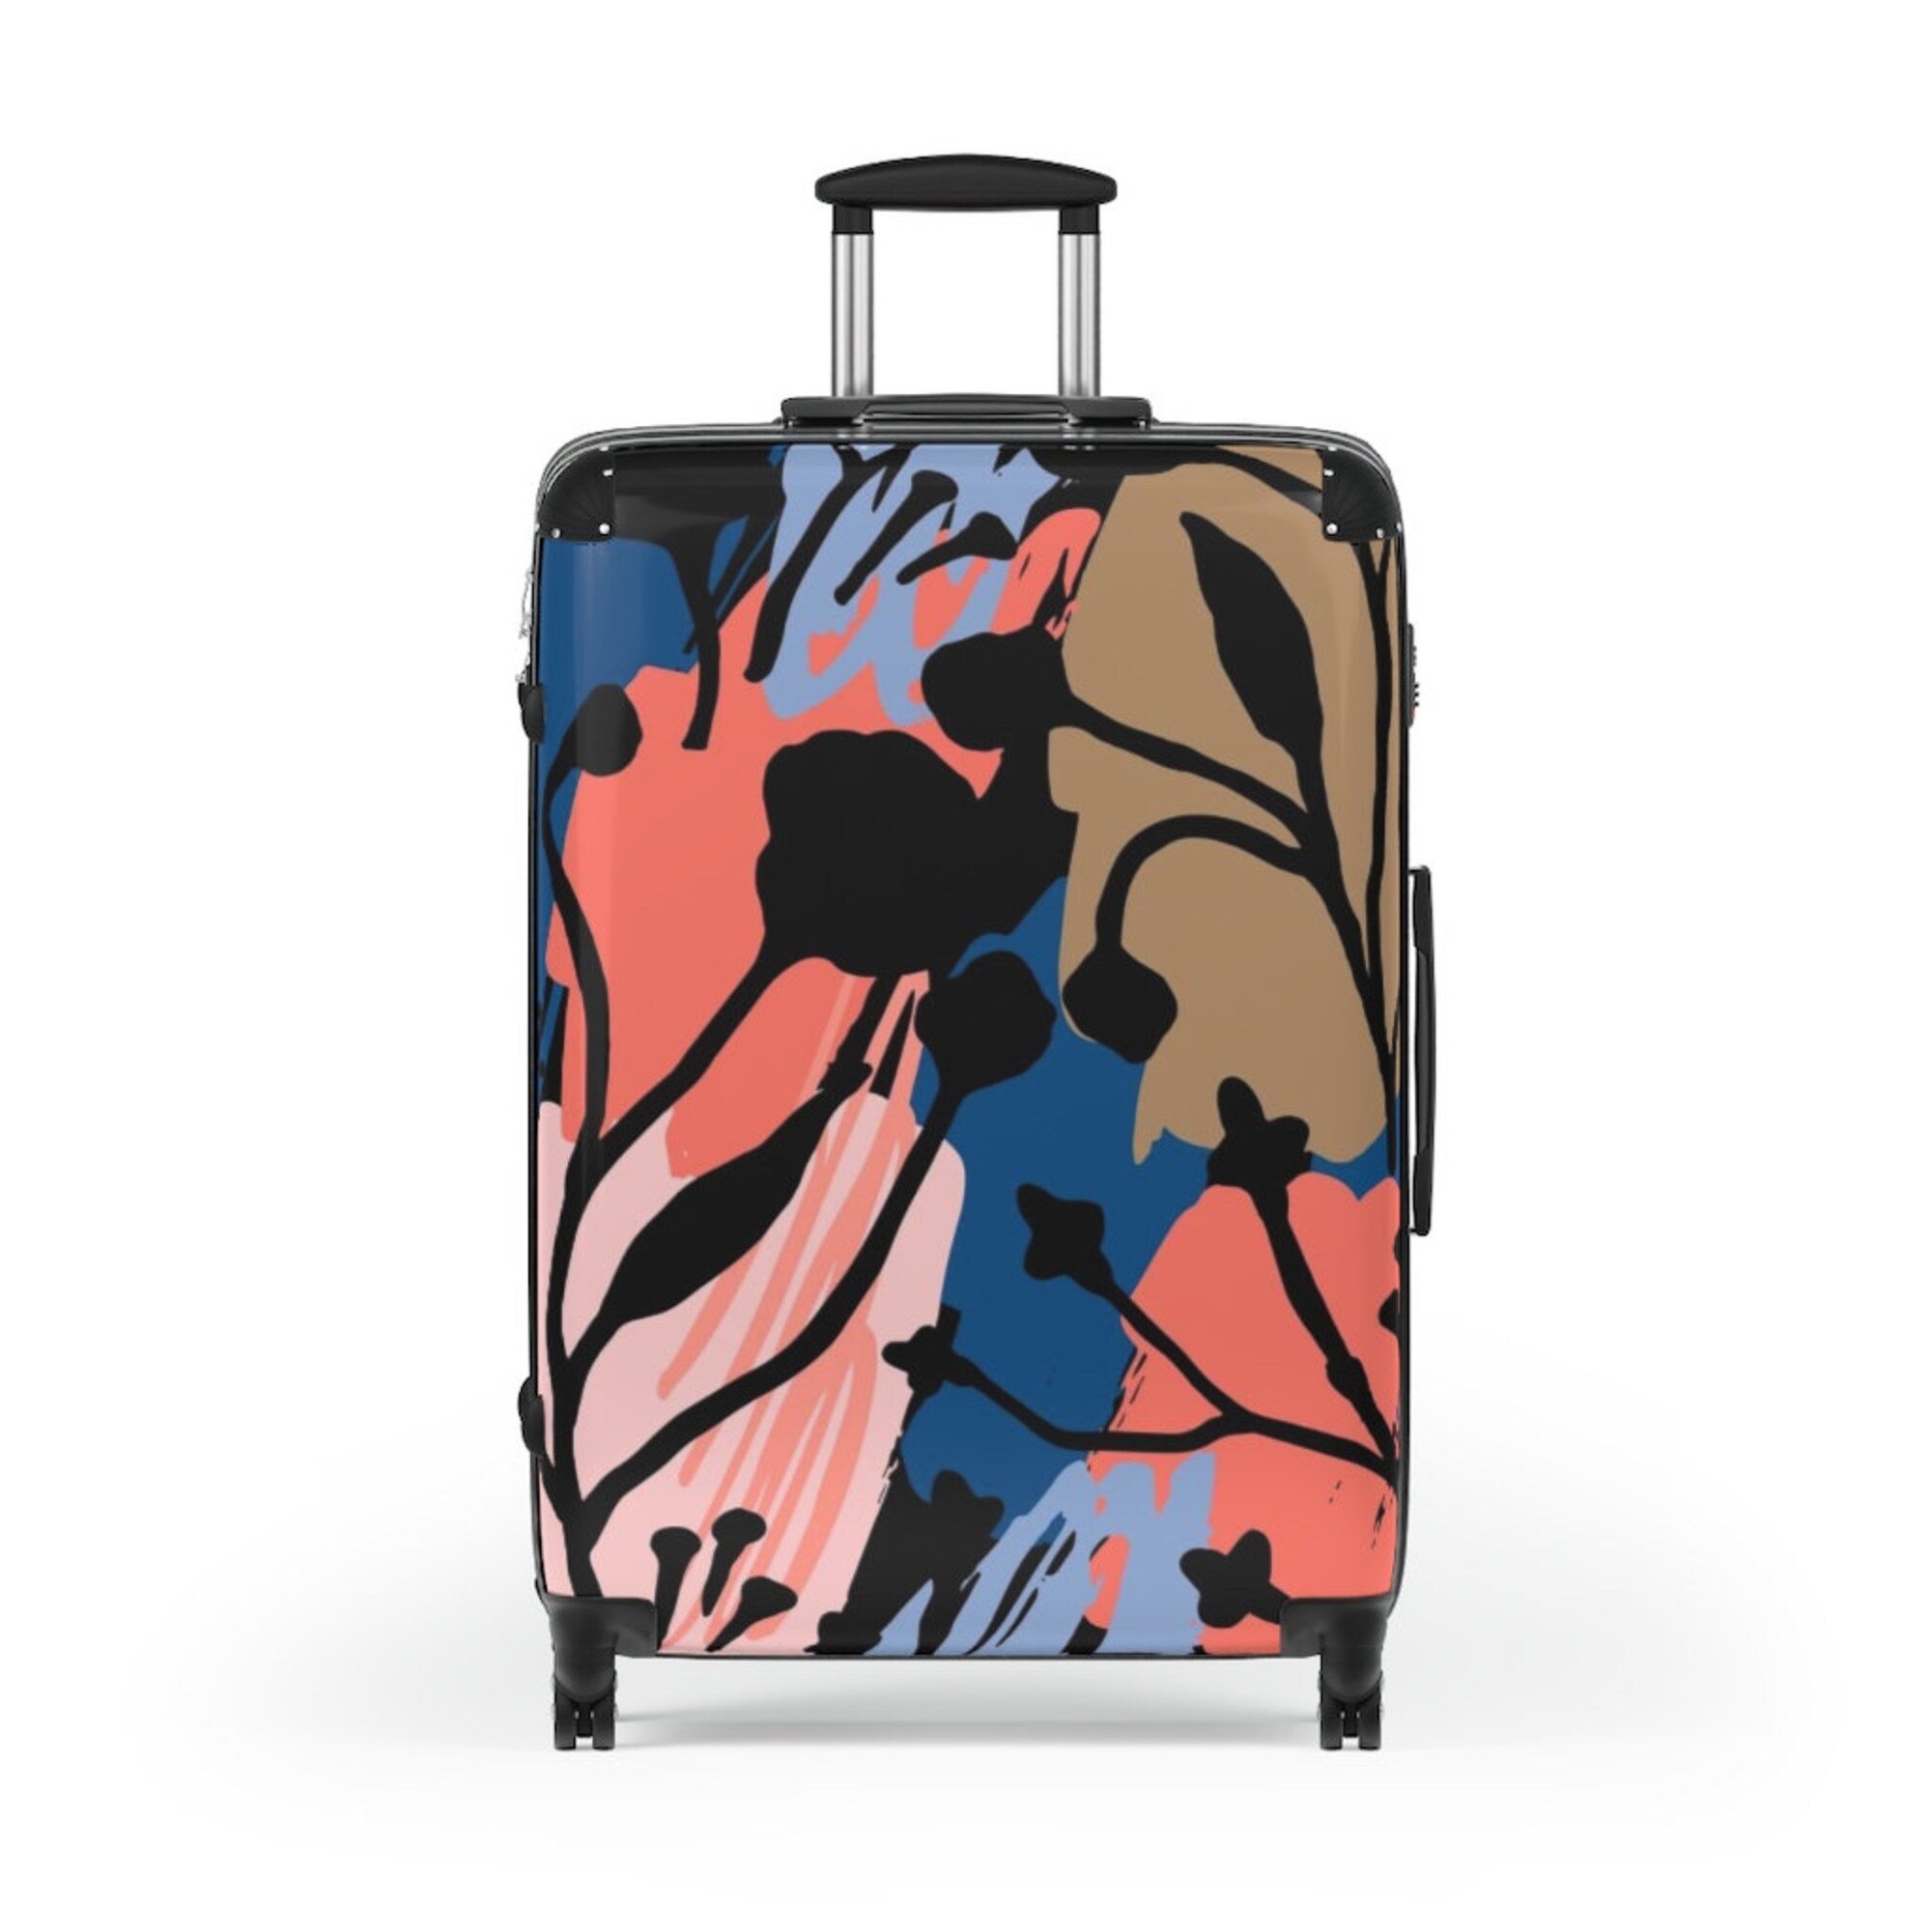 Discover The Clementine Suitcase